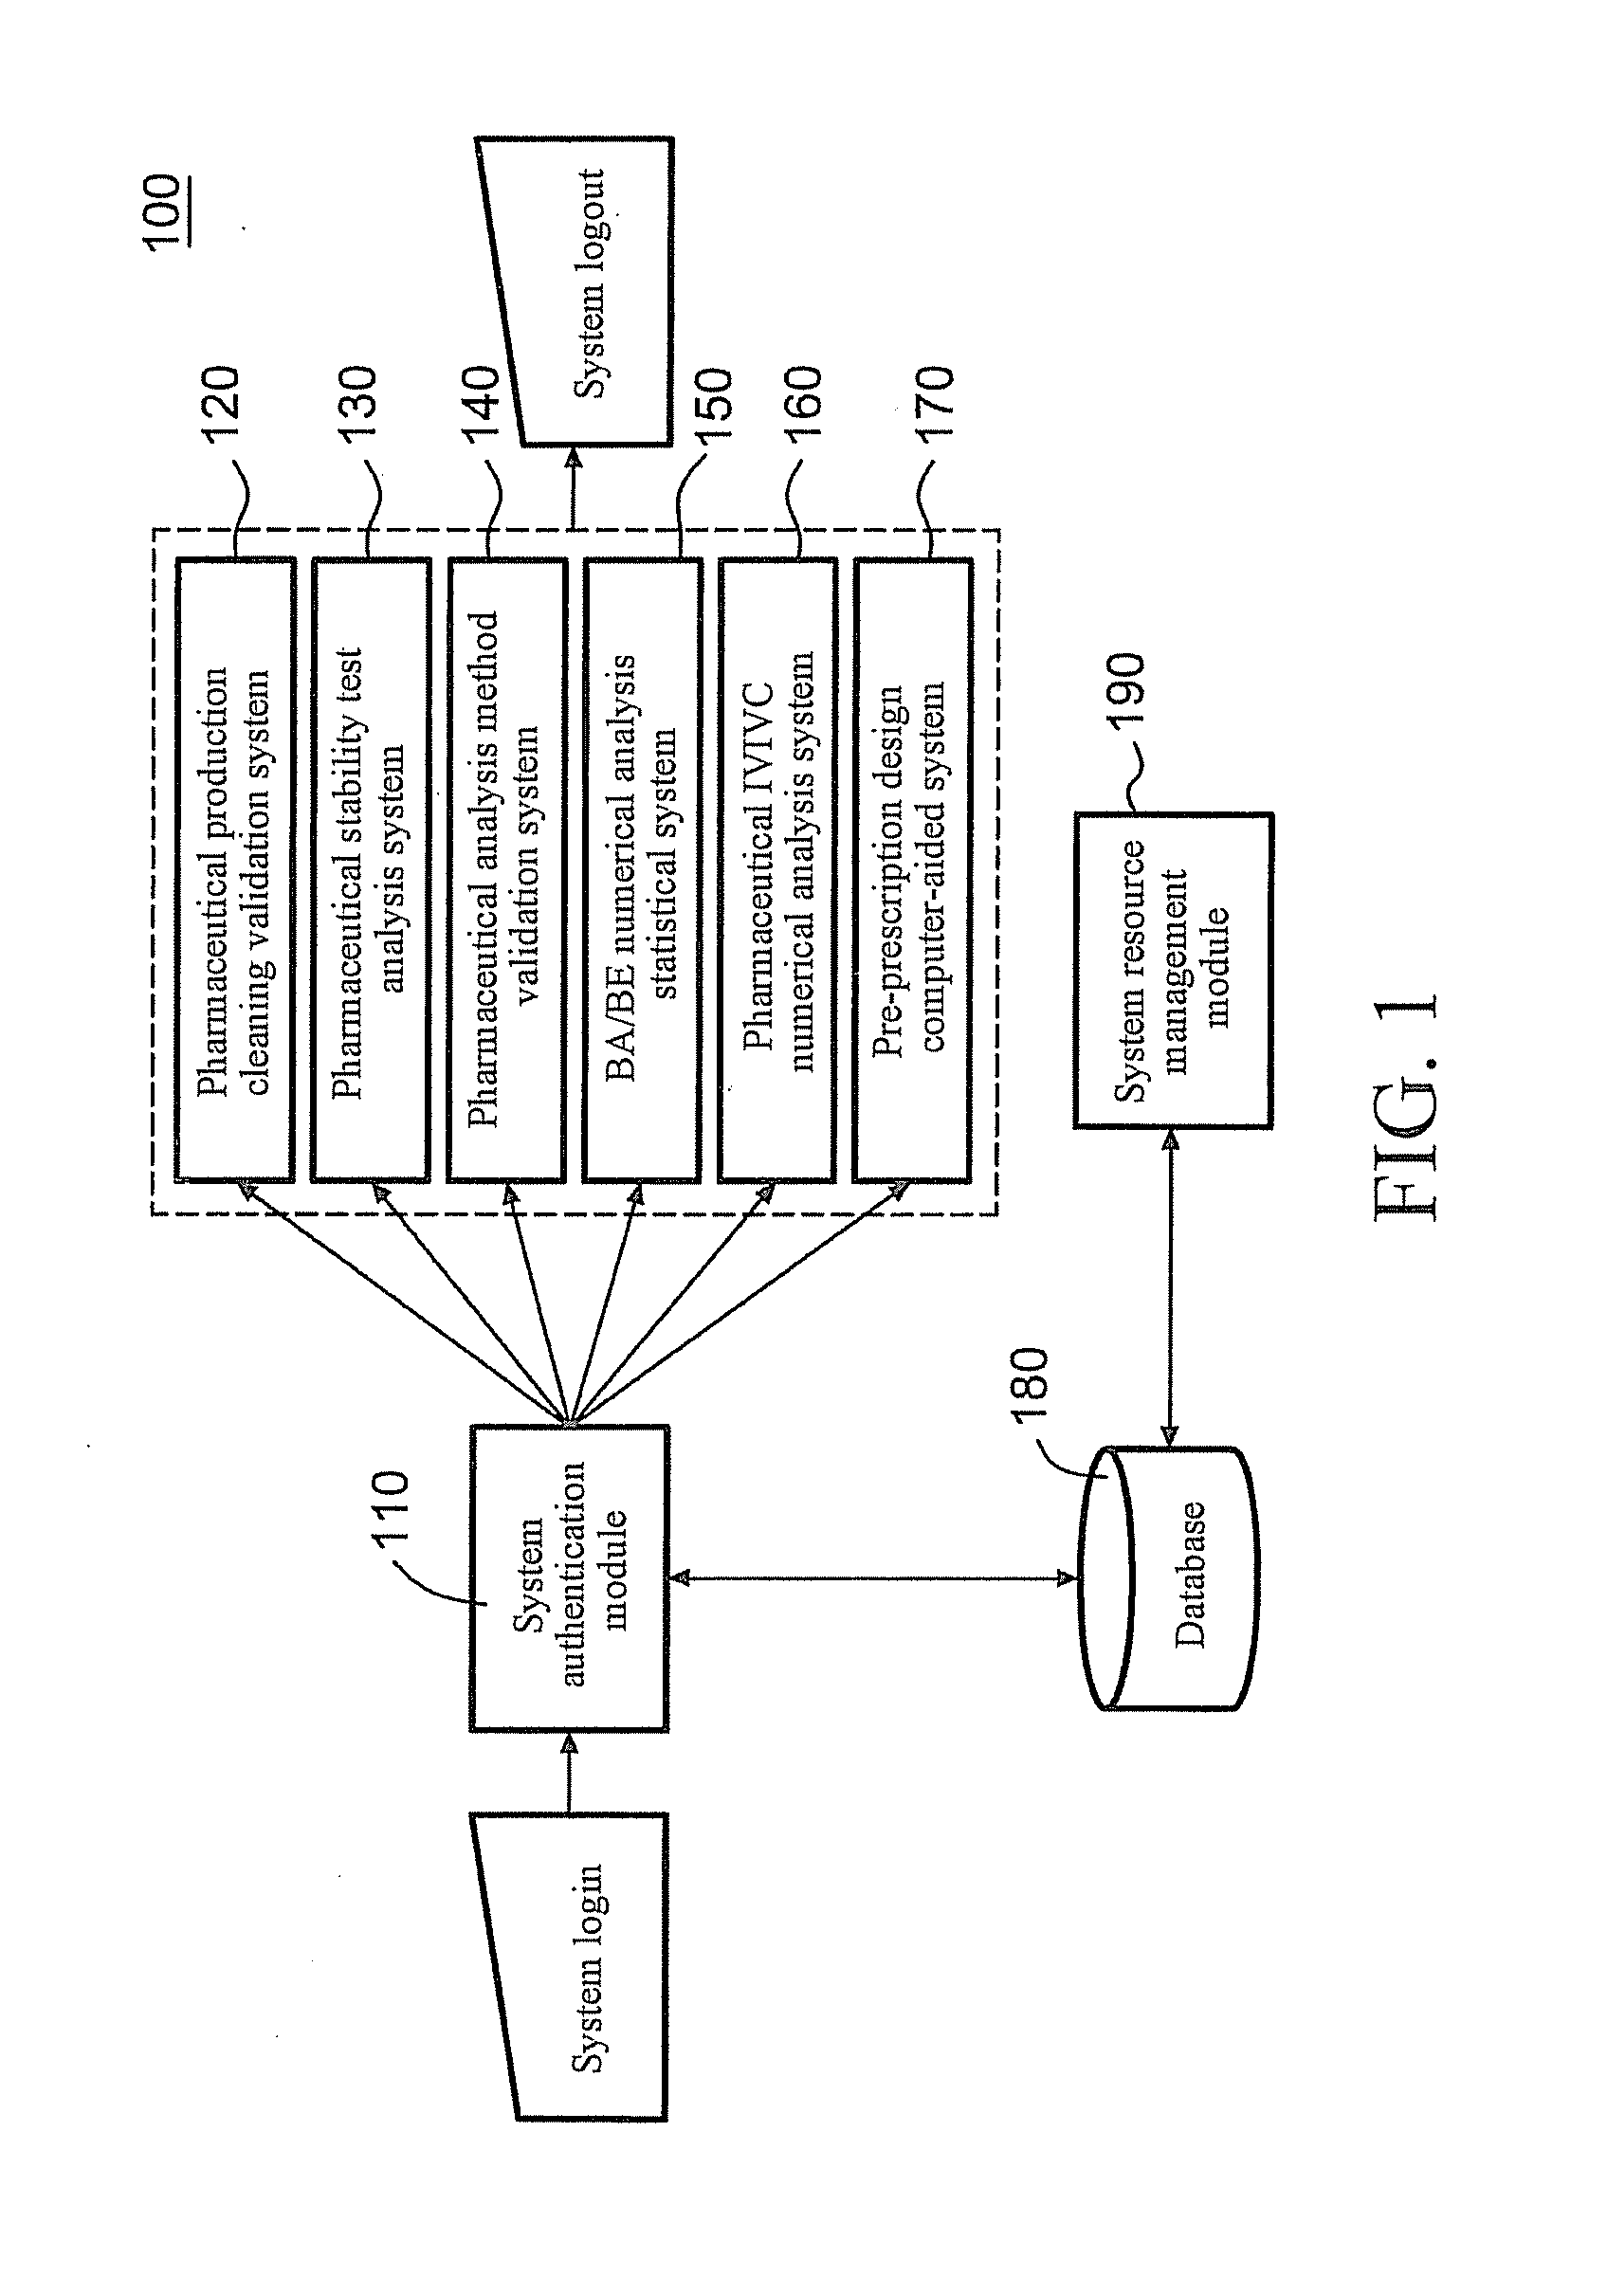 Server for Integrated Pharmaceutical Analysis and Report Generation Service, Method of Integrated Pharmaceutical Manufacturing and Research and Development Numerical Analysis, and Computer Readable Recording Medium